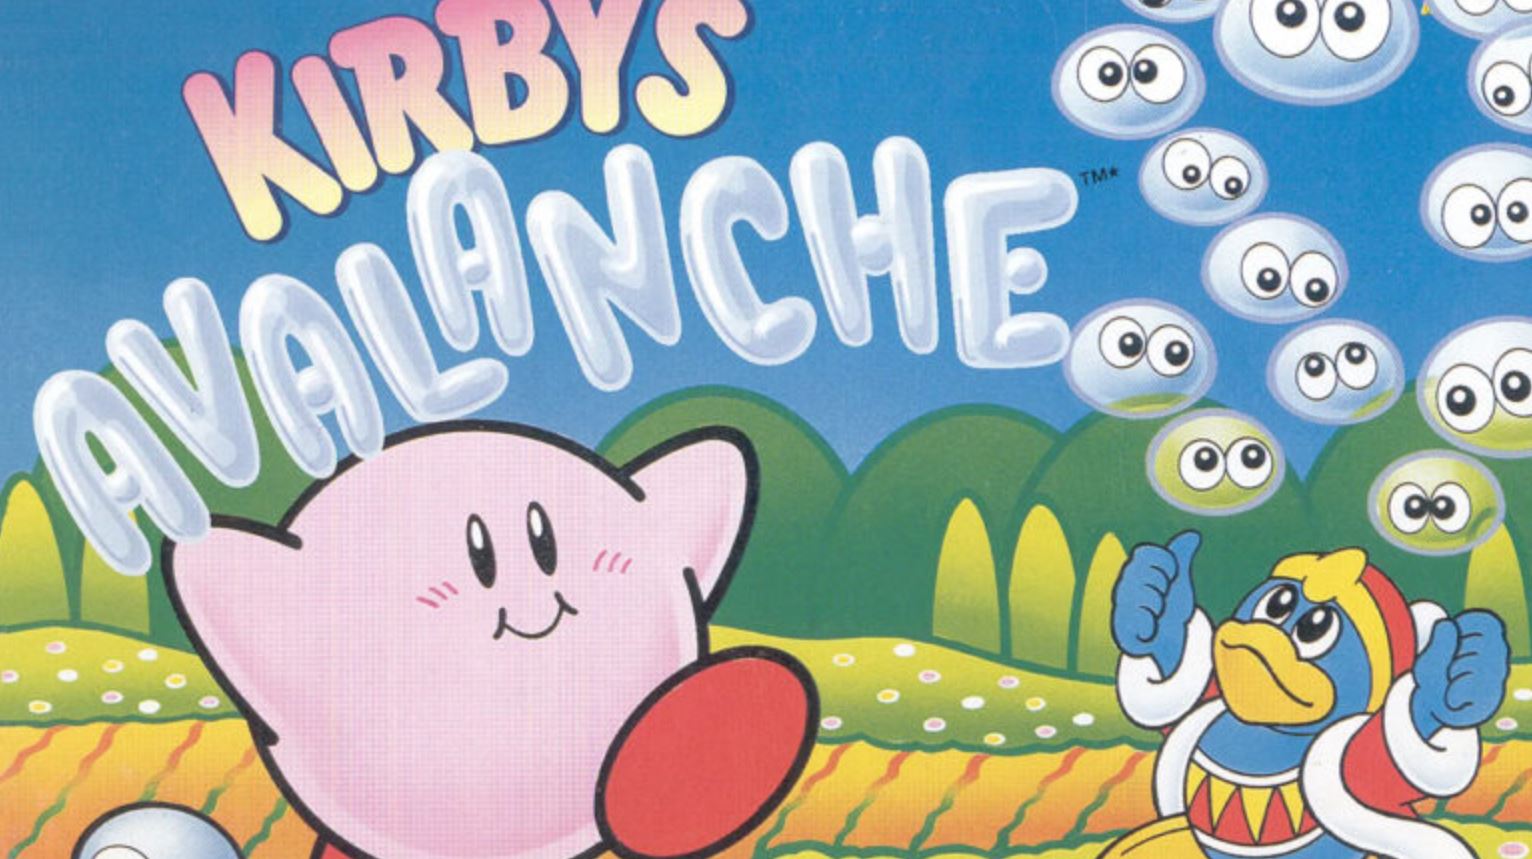 Great Kirby game